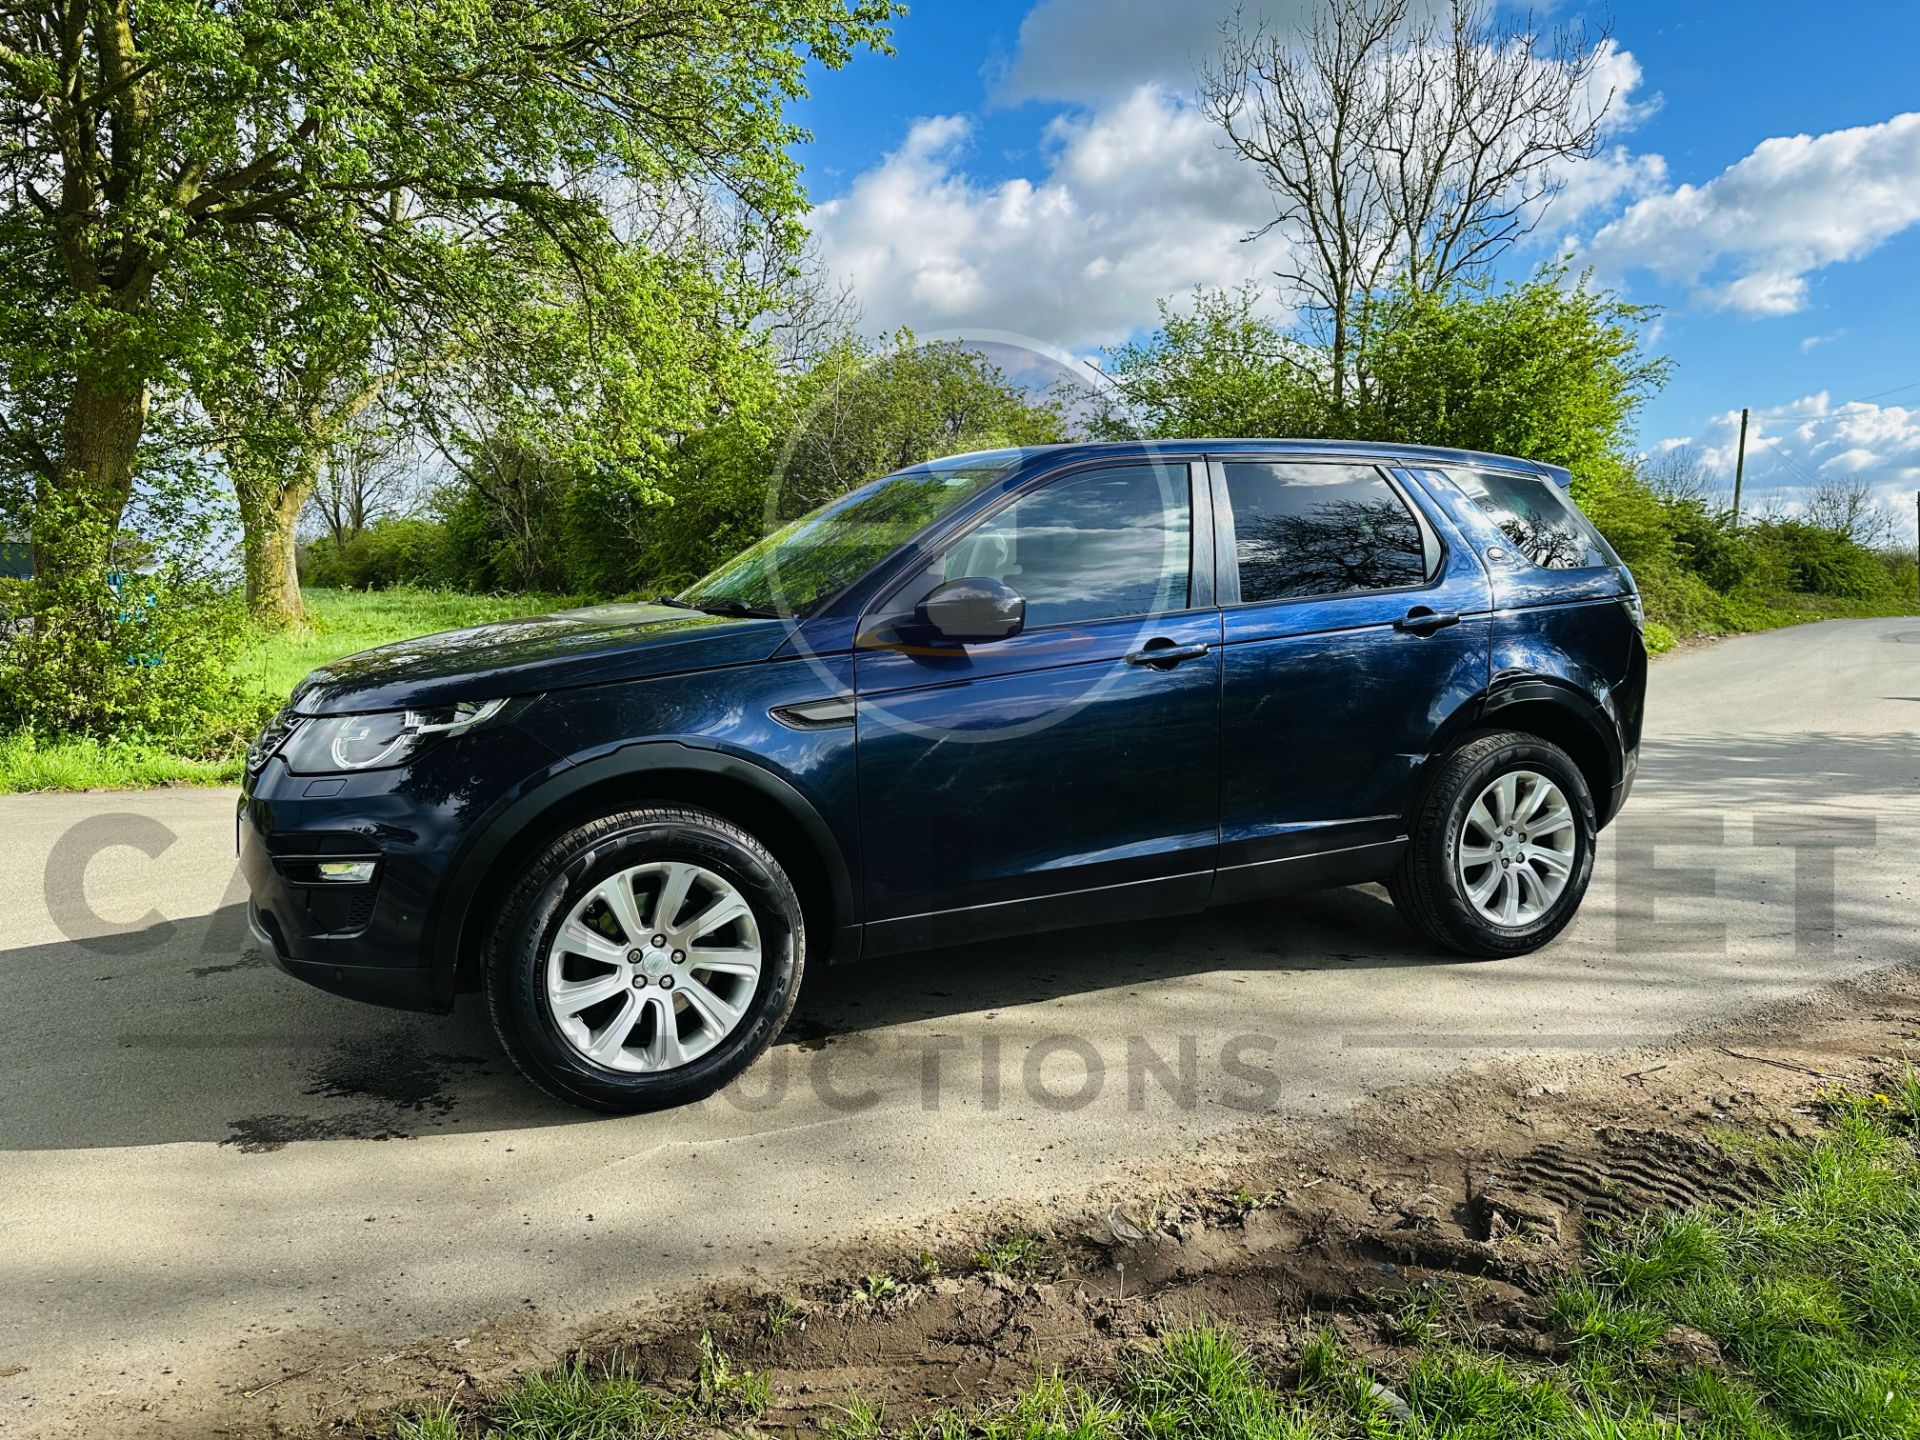 (ON SALE) LAND ROVER DISCOVERY SPORT *SE TECH* 7 SEATER SUV (2016 - EURO 6) 2.0 TD4 - (NO VAT) - Image 5 of 40